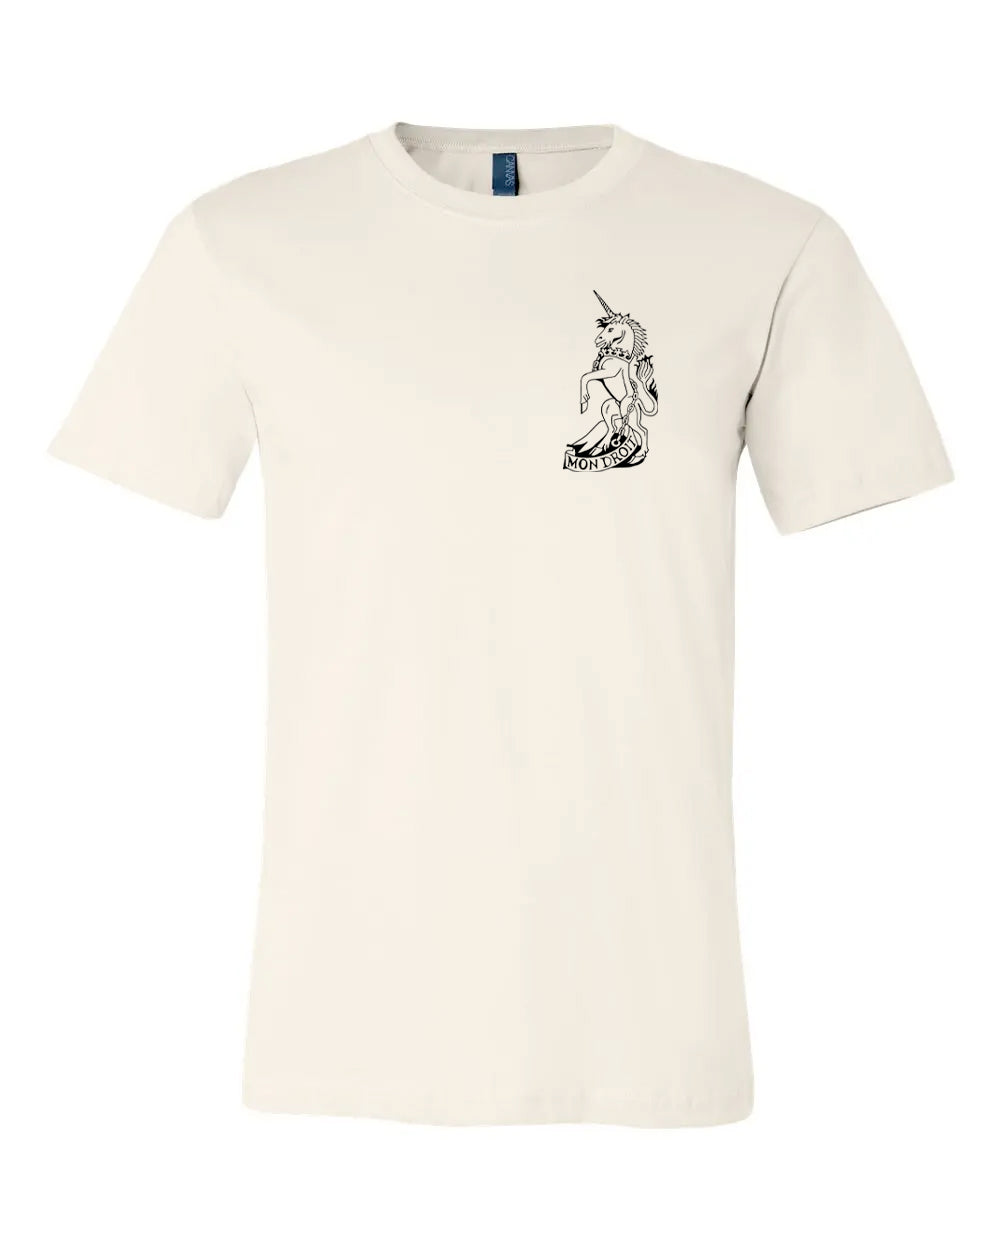 SHACKLED UNICORN CREST T-Shirts | Unsettled Apparel